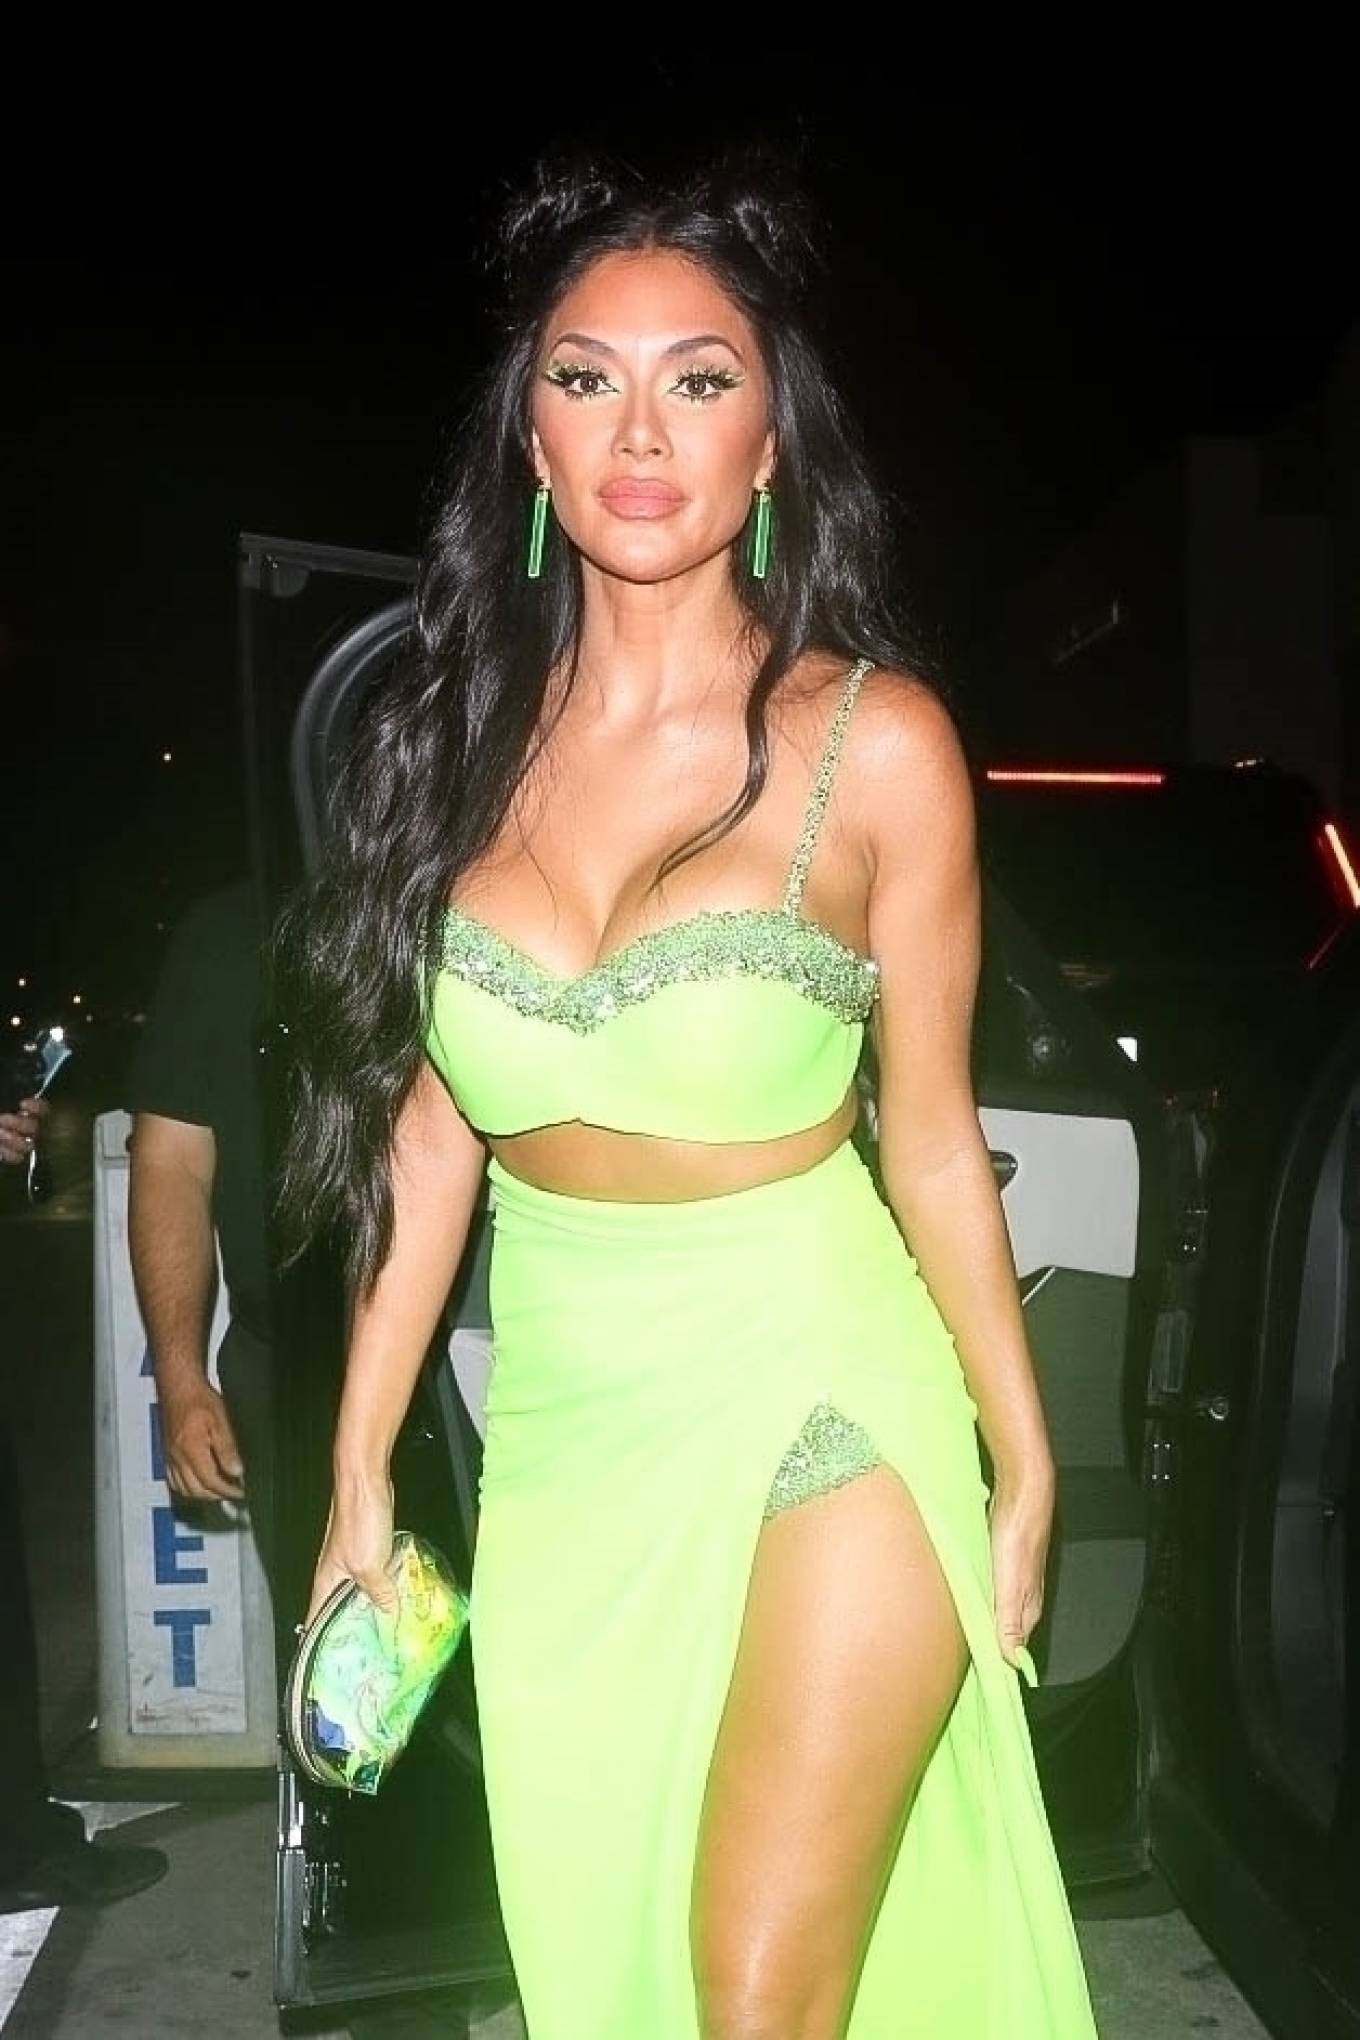 Nicole Scherzinger 2021 : Nicole Scherzinger – Night out in a neon green dress at Catch LA in West Hollywood-23